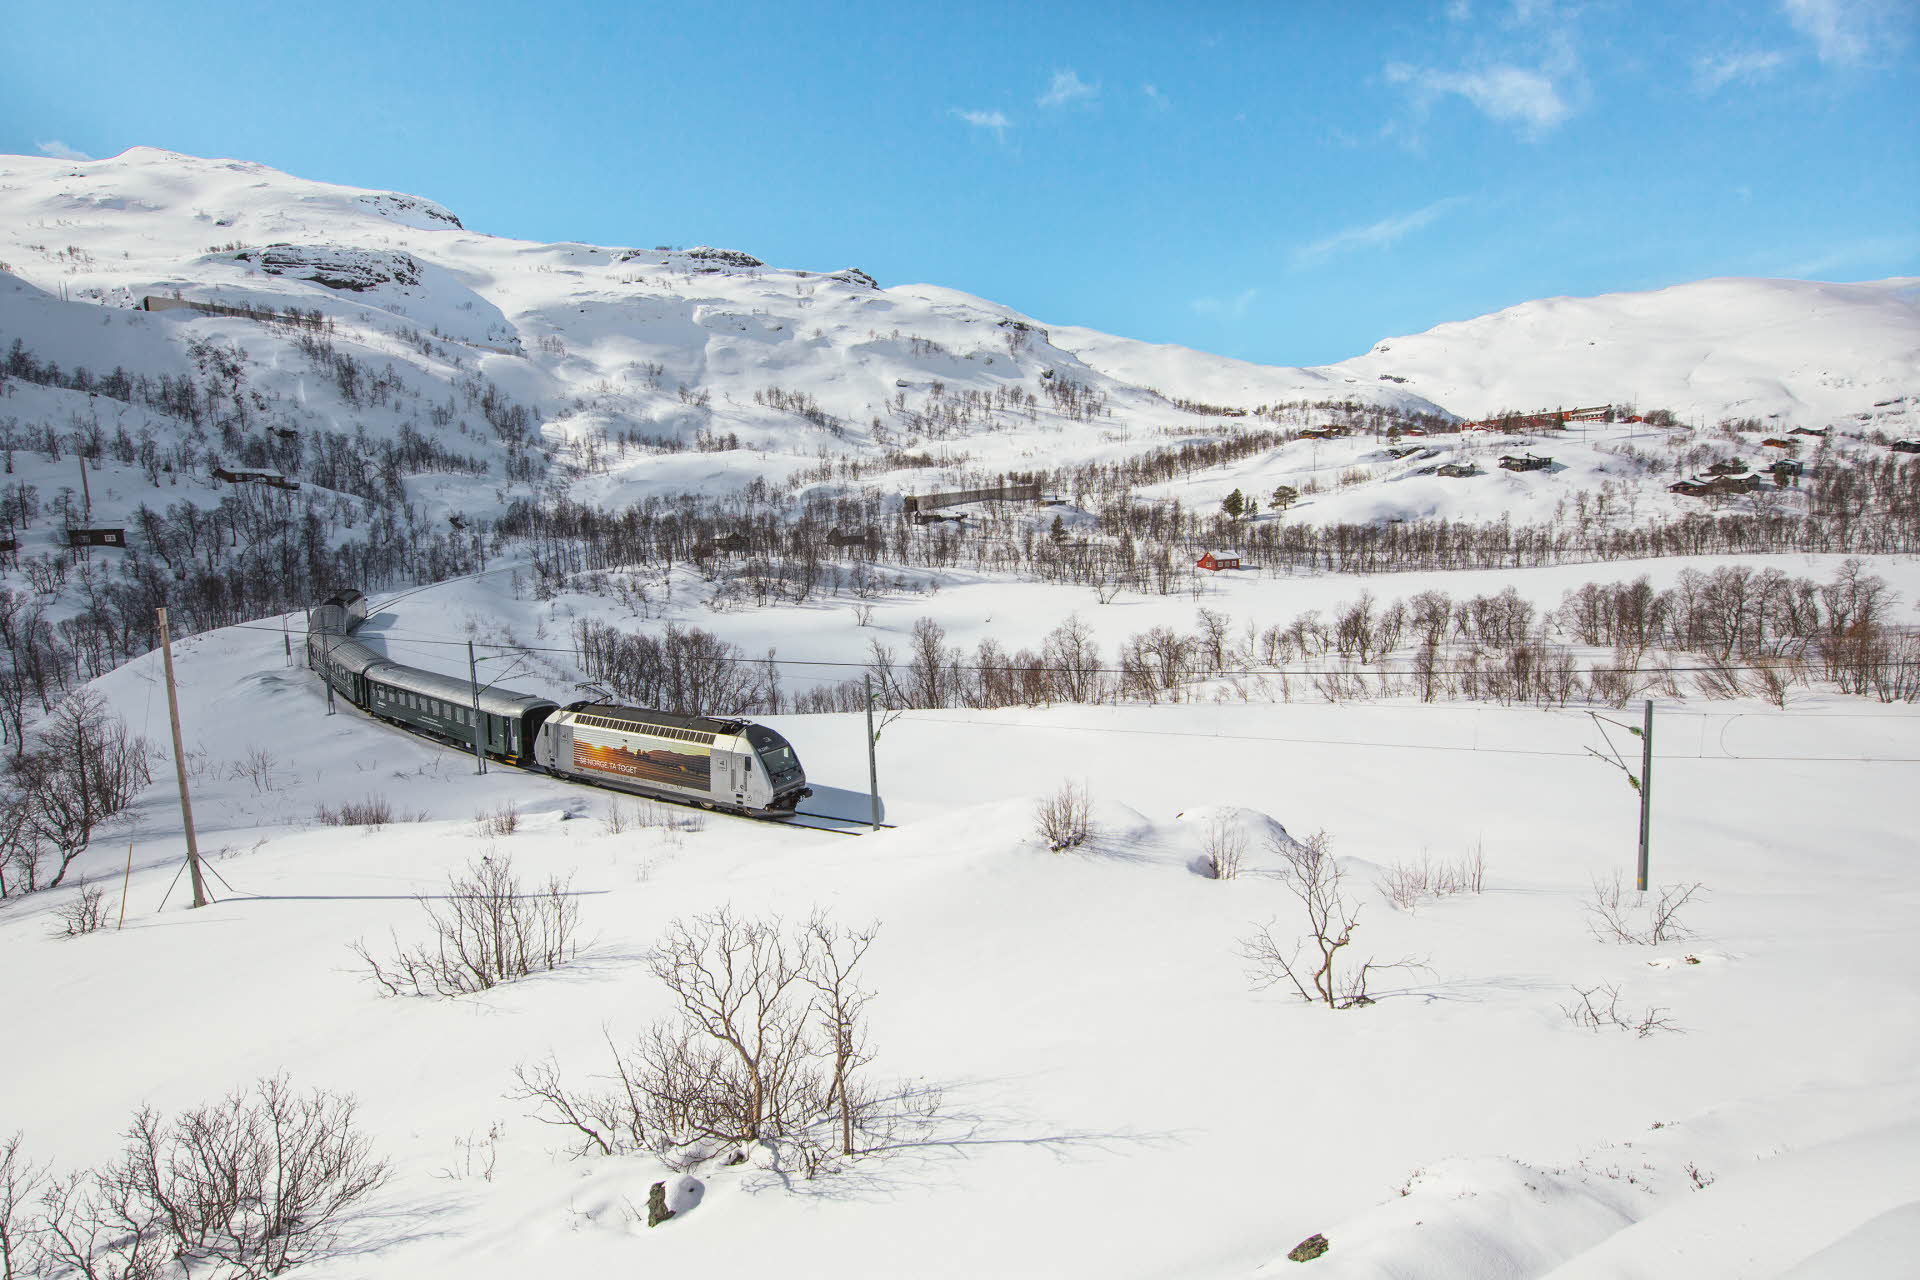 The Flåm Railway going through snowy and mountainous landscape on a nice winter day. 